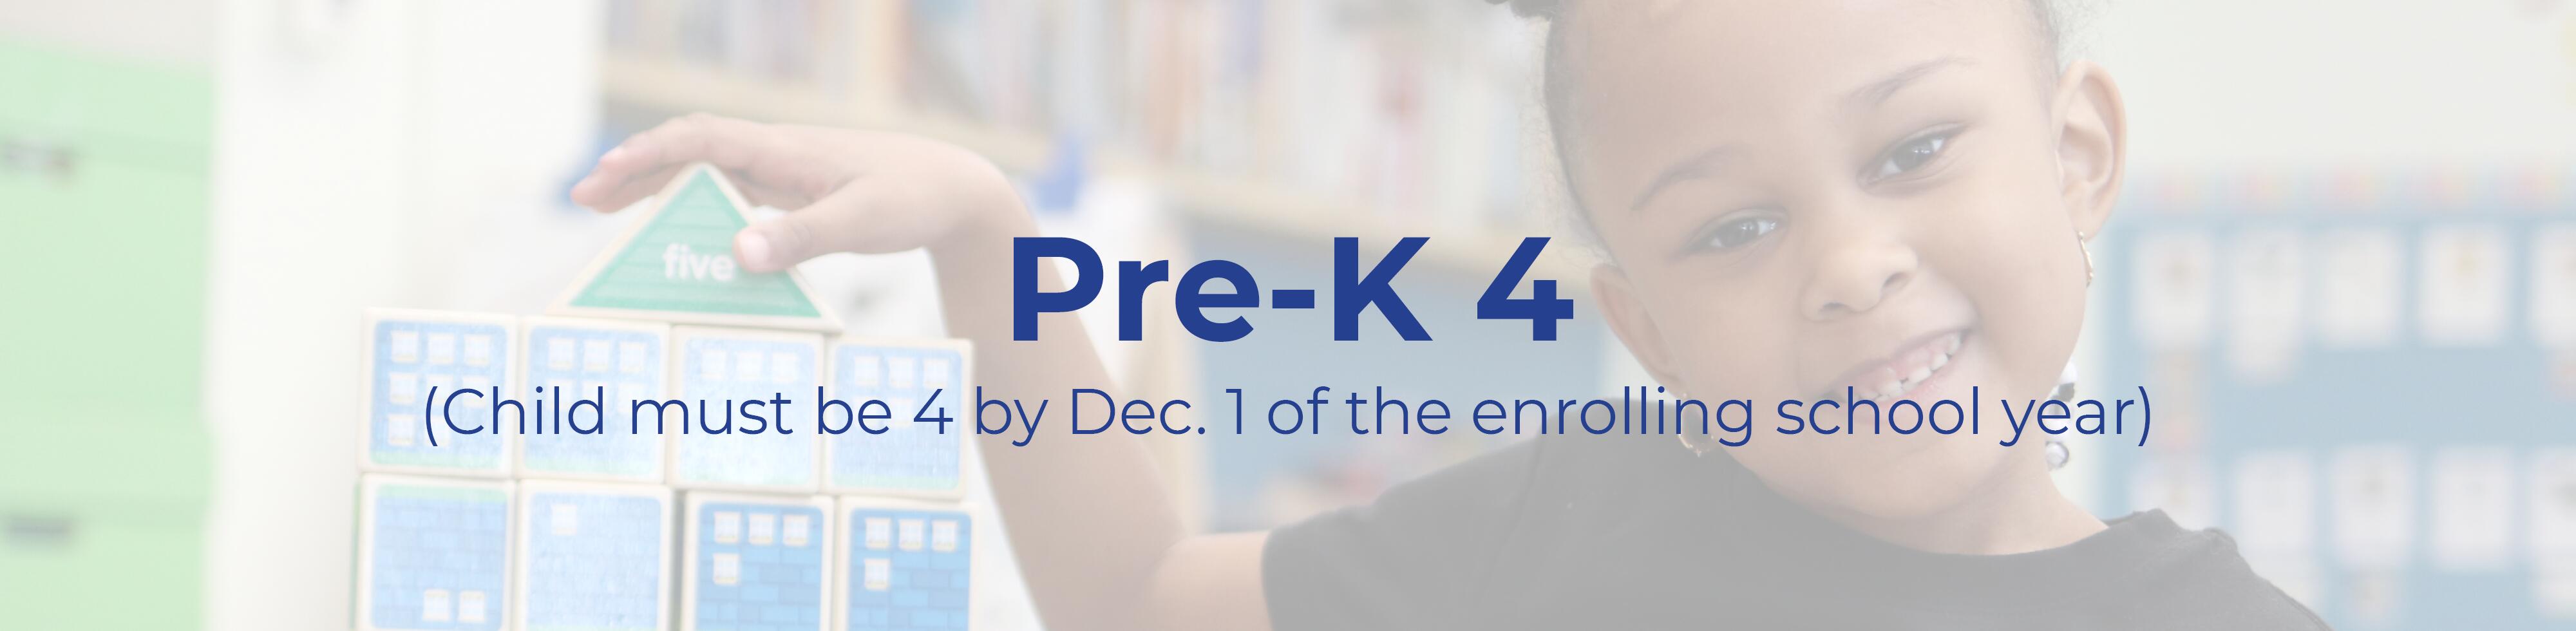 Text that reads: Pre-K 4 (Child must be 4 by Dec. 1 of the enrolling school year)